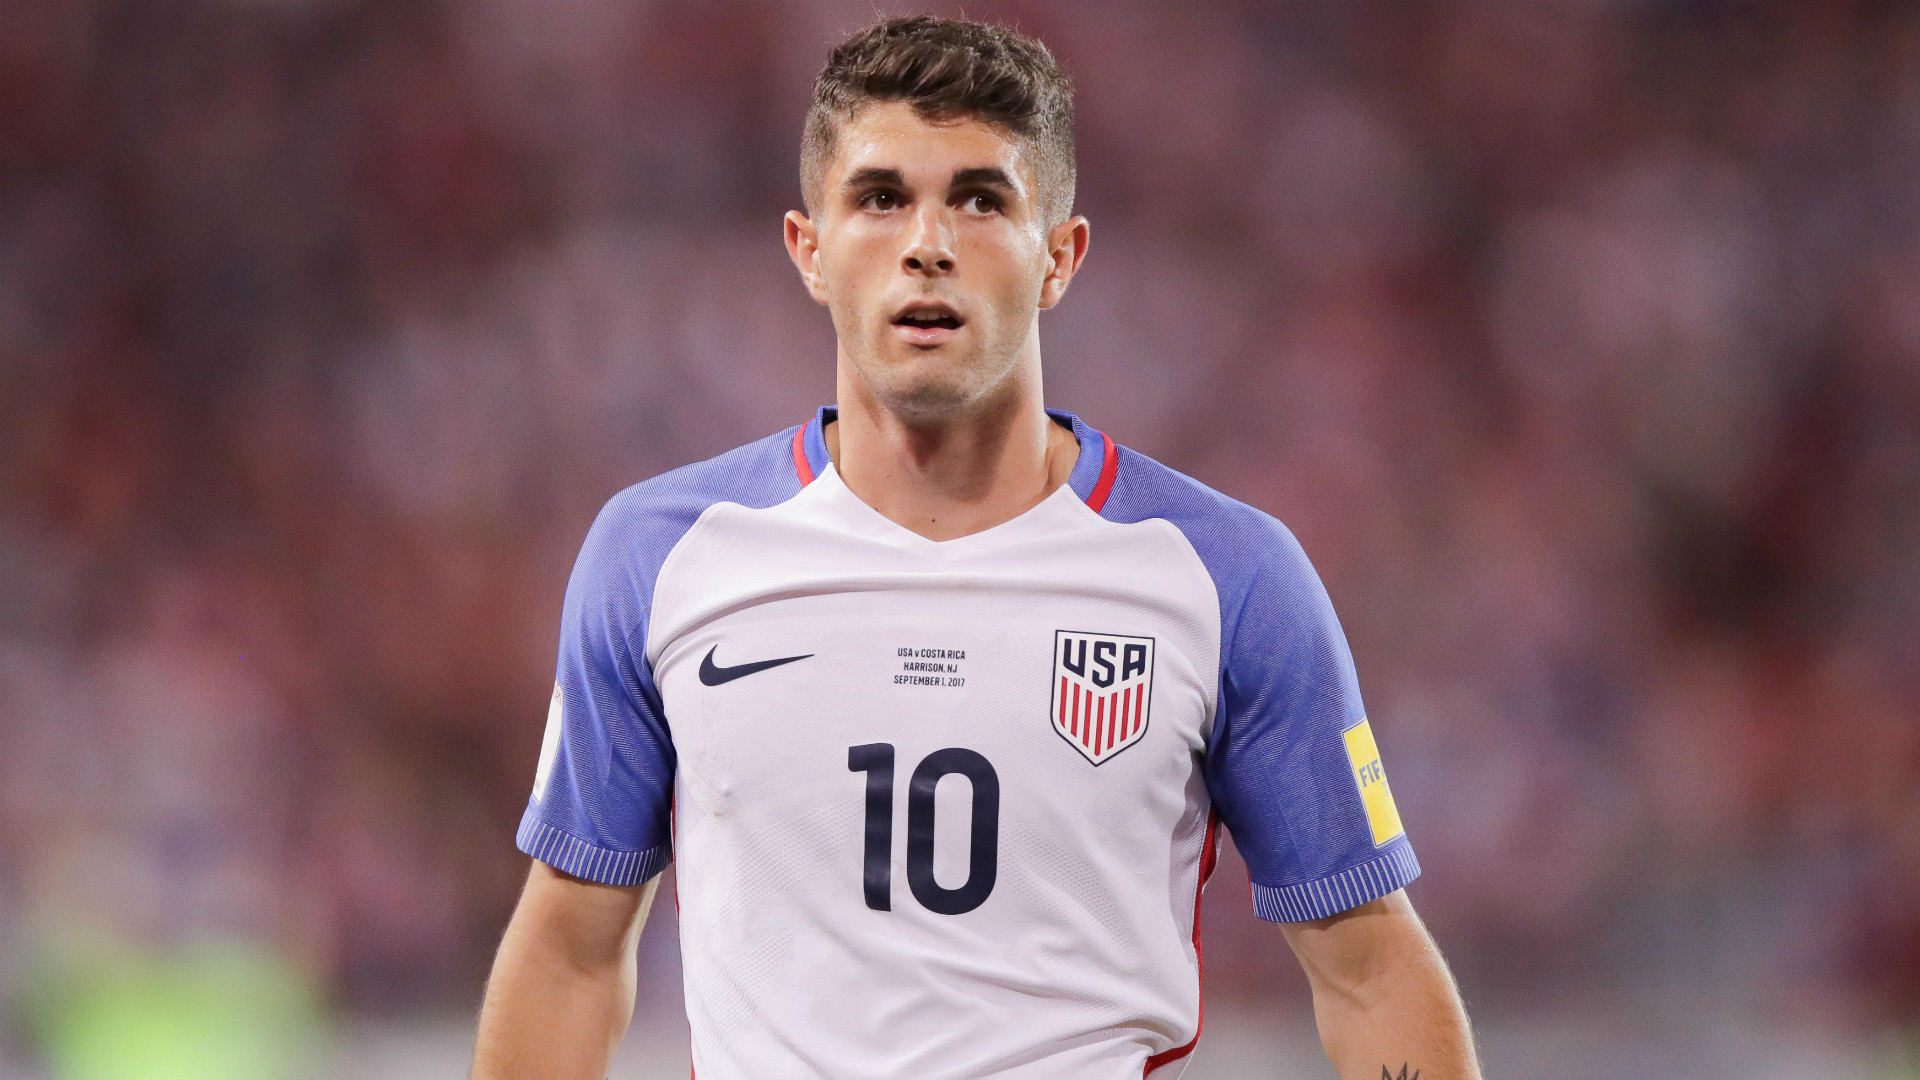 USMNT roster: Pulisic, McKennie headline squad to face England and